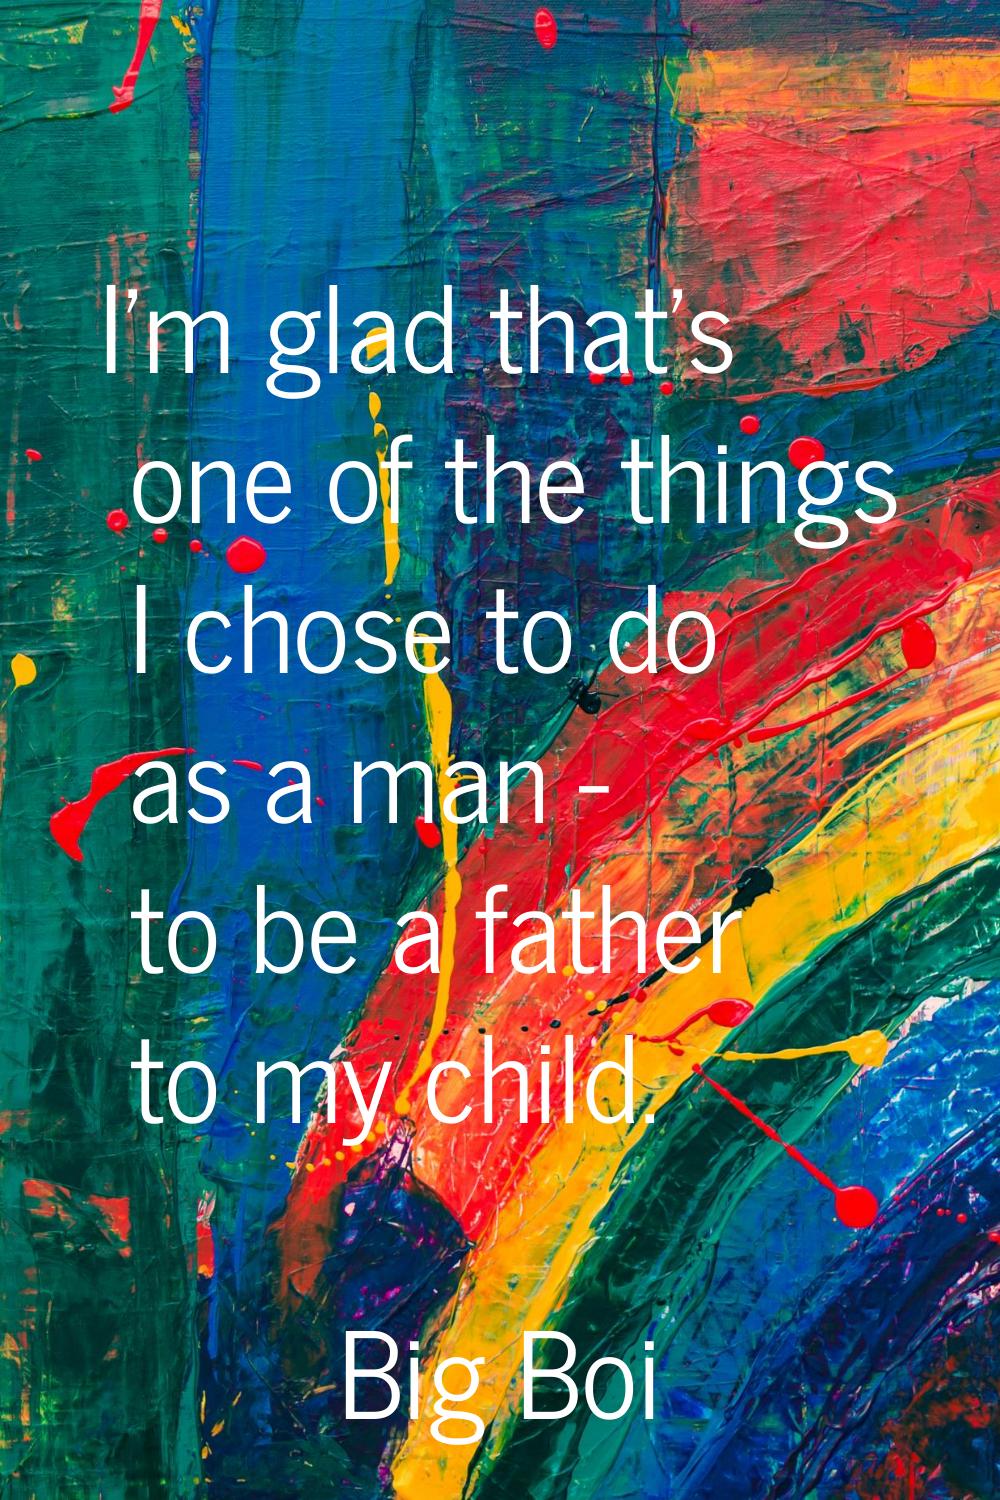 I'm glad that's one of the things I chose to do as a man - to be a father to my child.